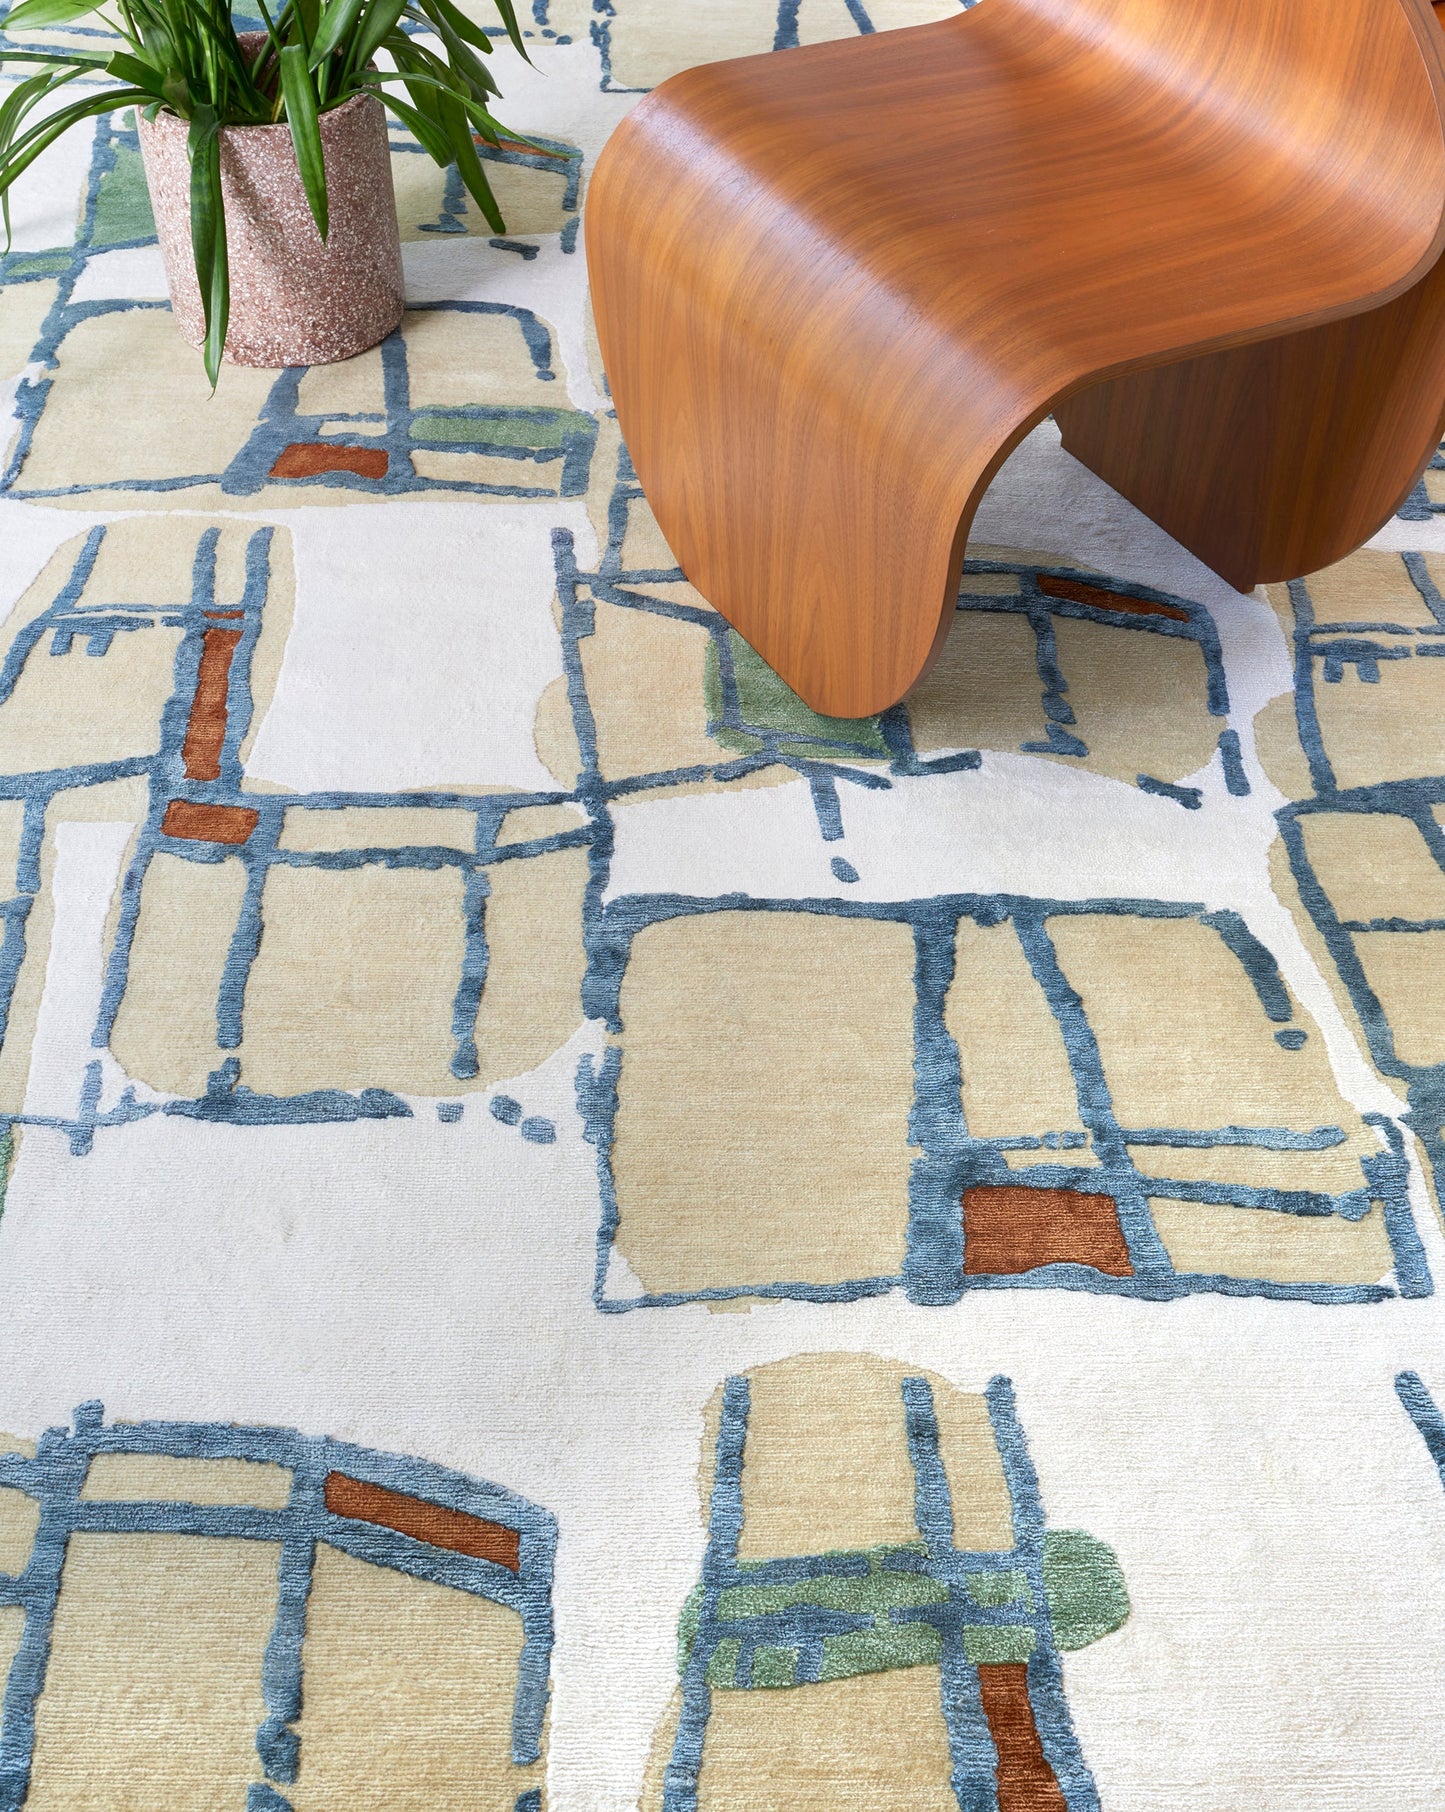 A modern Quotidiana Hand Knotted Rug 6' x 9' Isthmus with a wooden chair and a potted plant undergoes the Eskayel design process